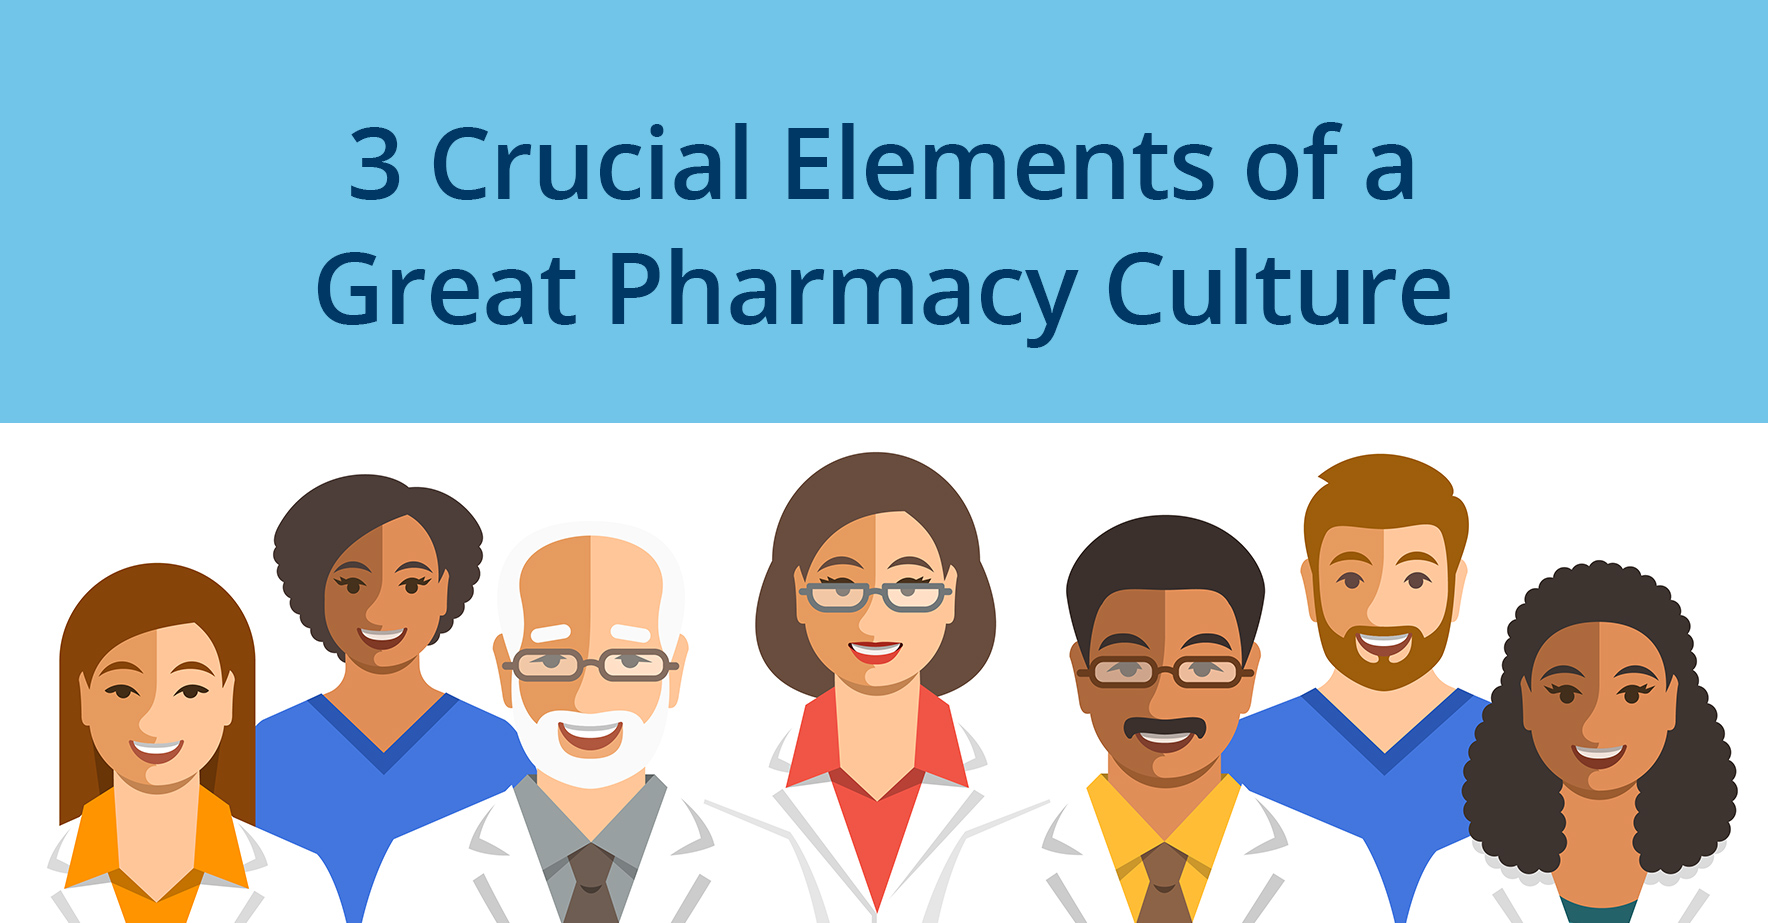 3_crucial_elements_of_a_great_pharmacy_culture.jpg